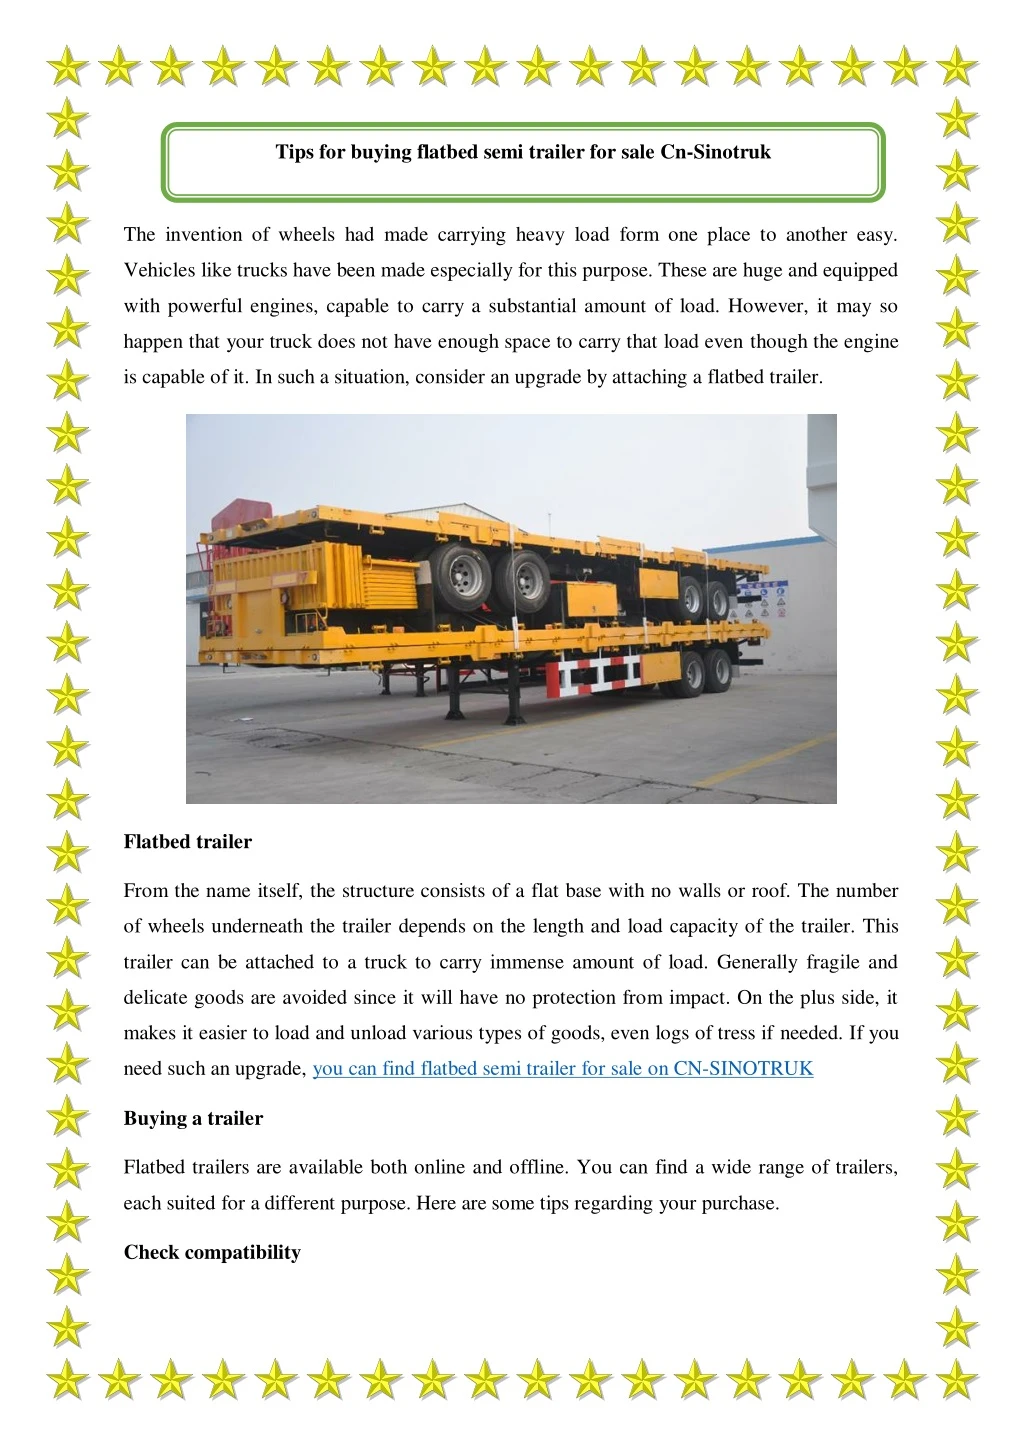 tips for buying flatbed semi trailer for sale